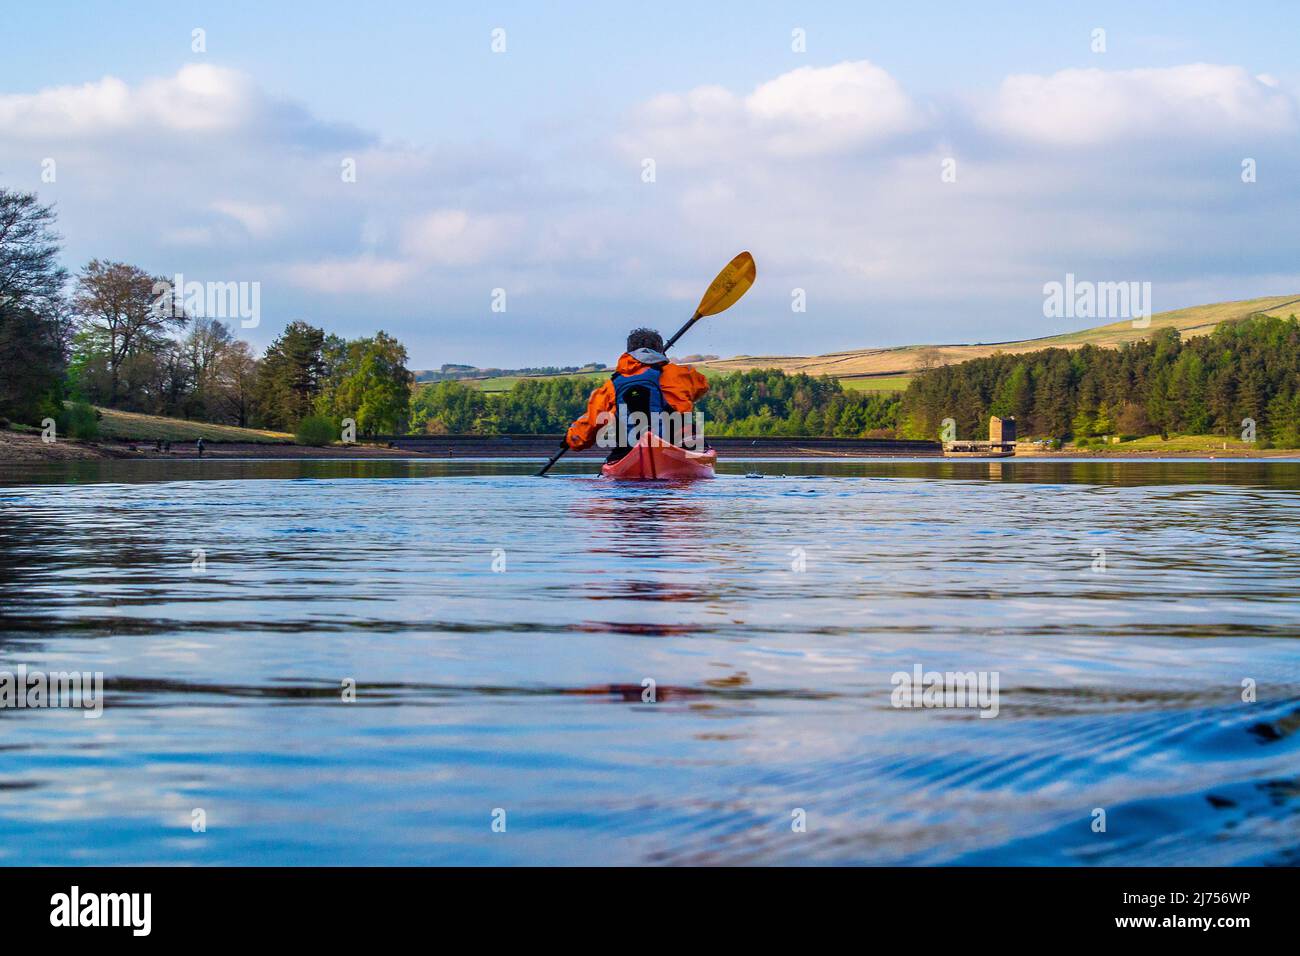 A kayaker paddling on Errwood reservoir in the Peak District Stock Photo